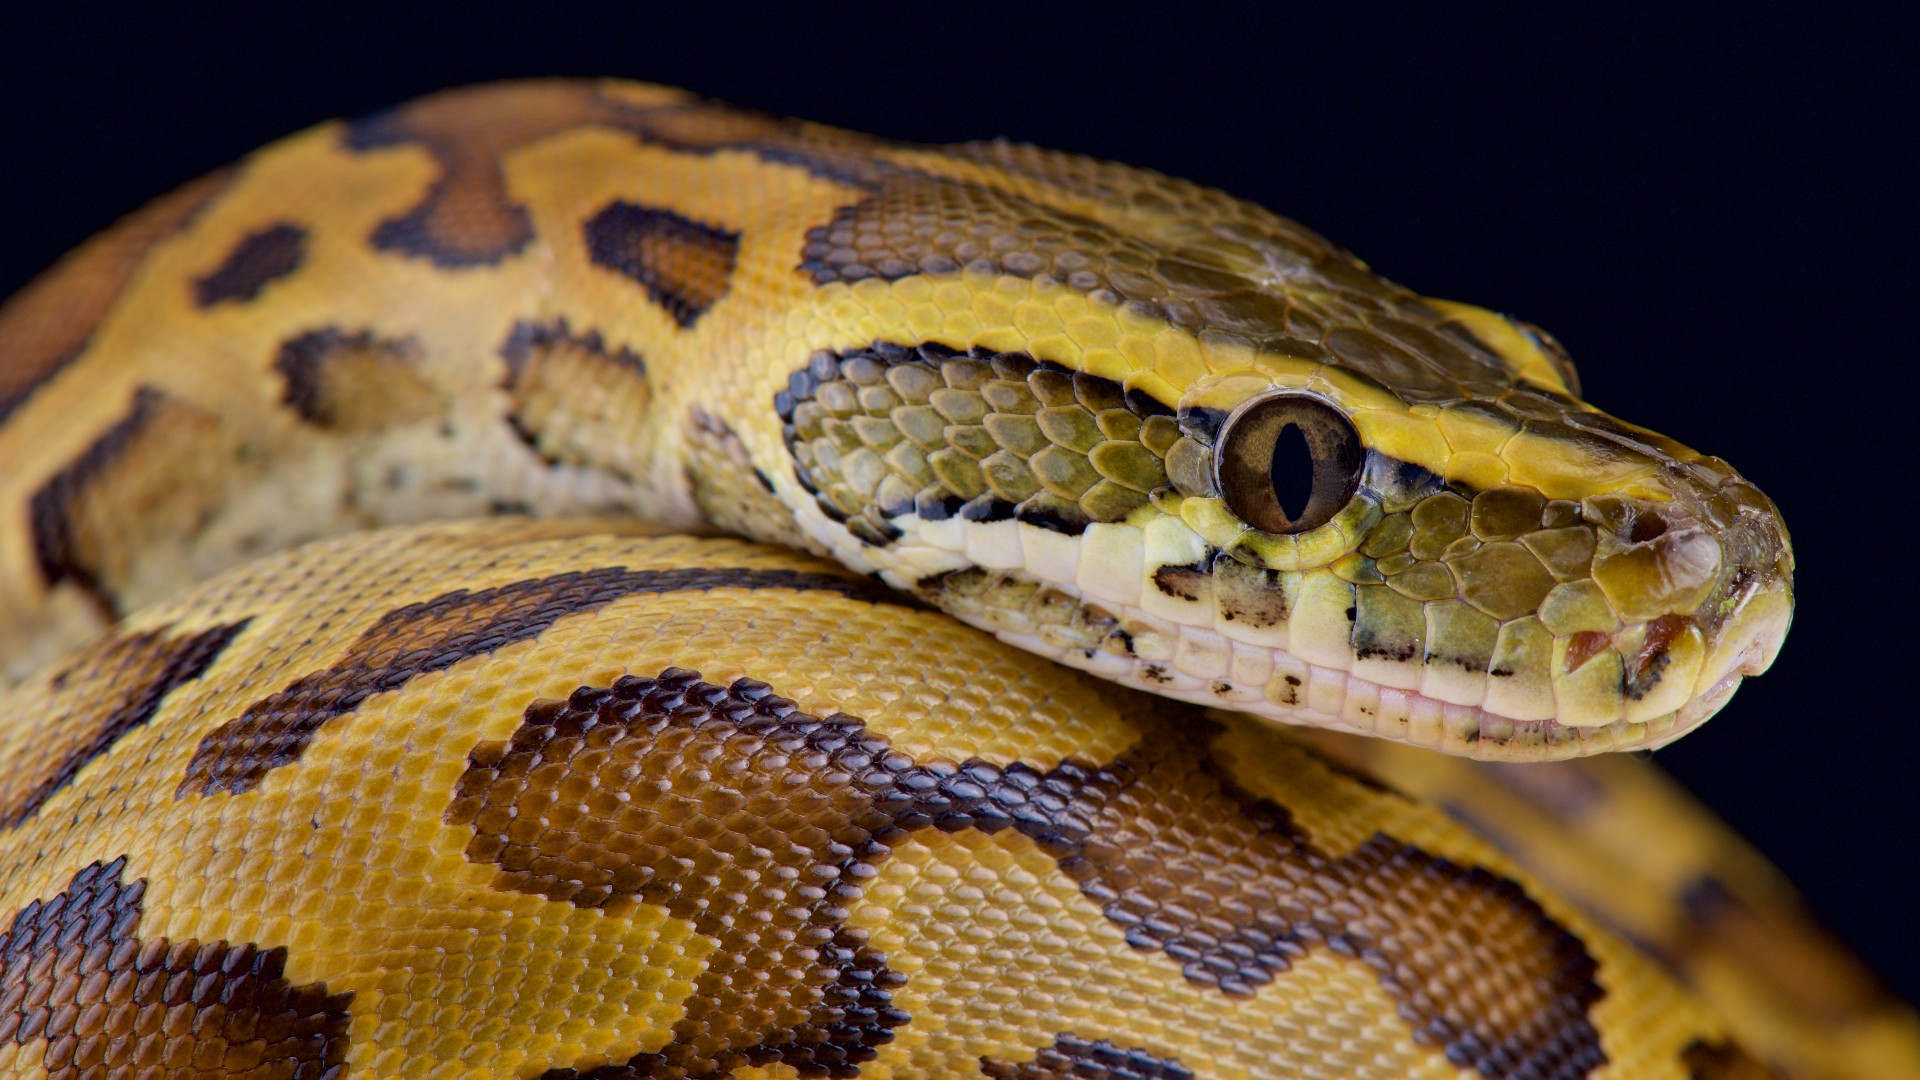 Watch a python swallow an impala whole in this jaw-dropping video thumbnail